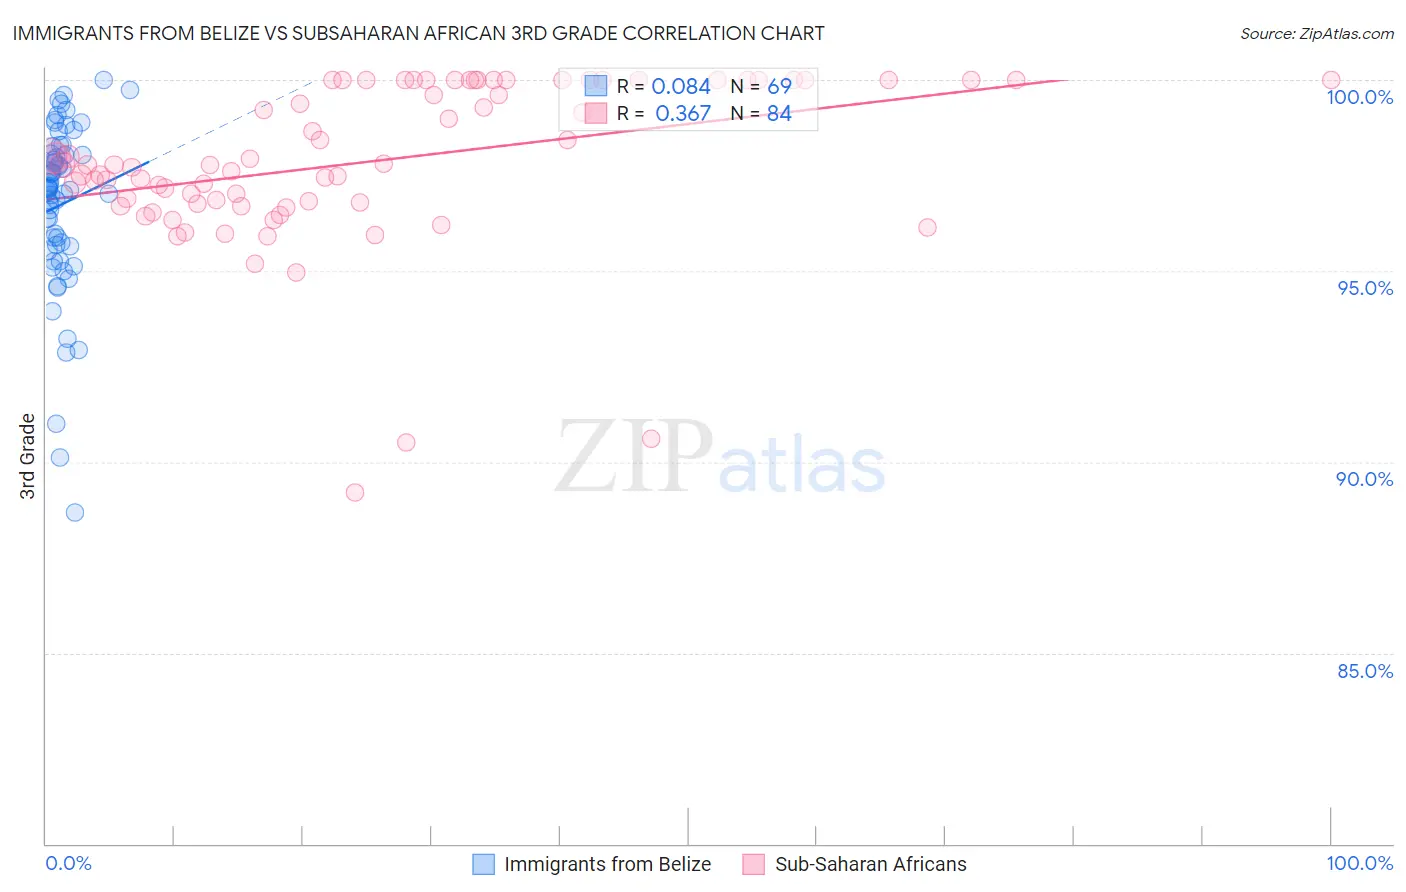 Immigrants from Belize vs Subsaharan African 3rd Grade